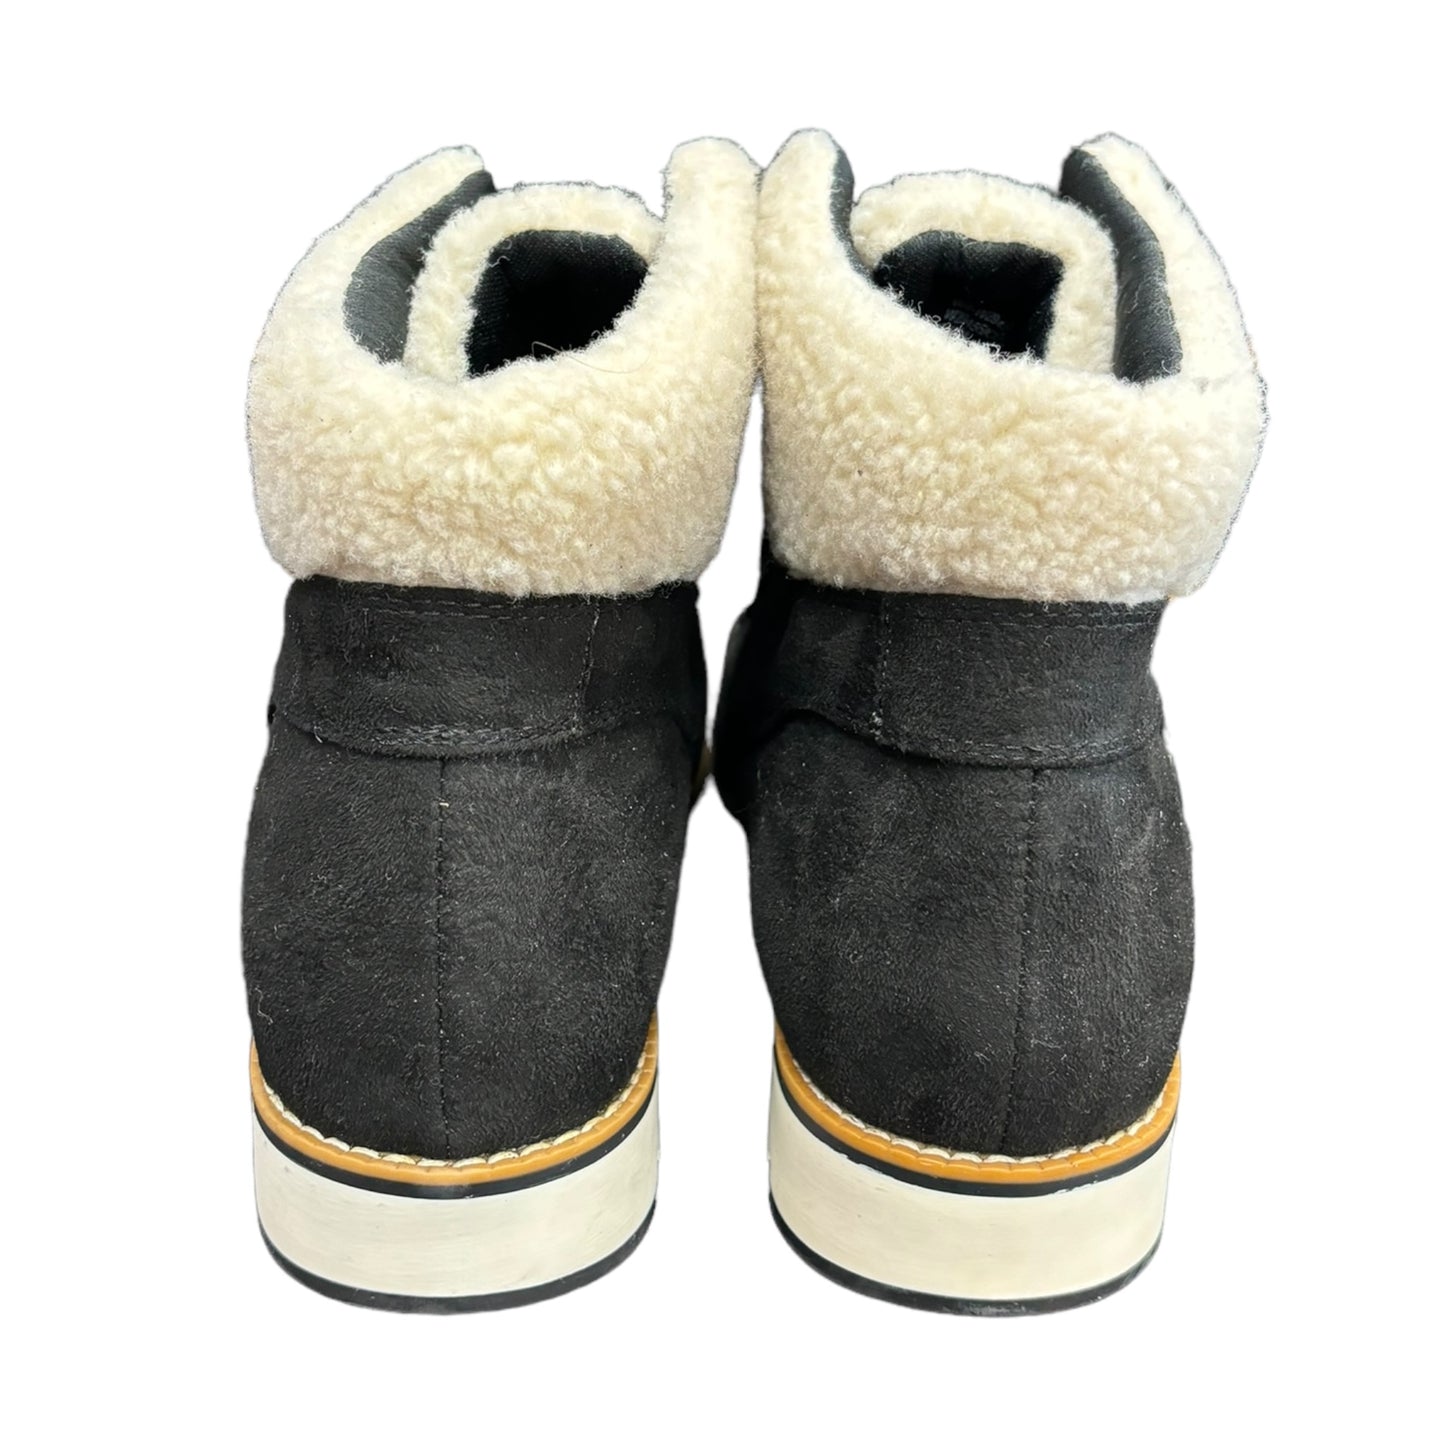 Boots Snow By White Mountain  Size: 10